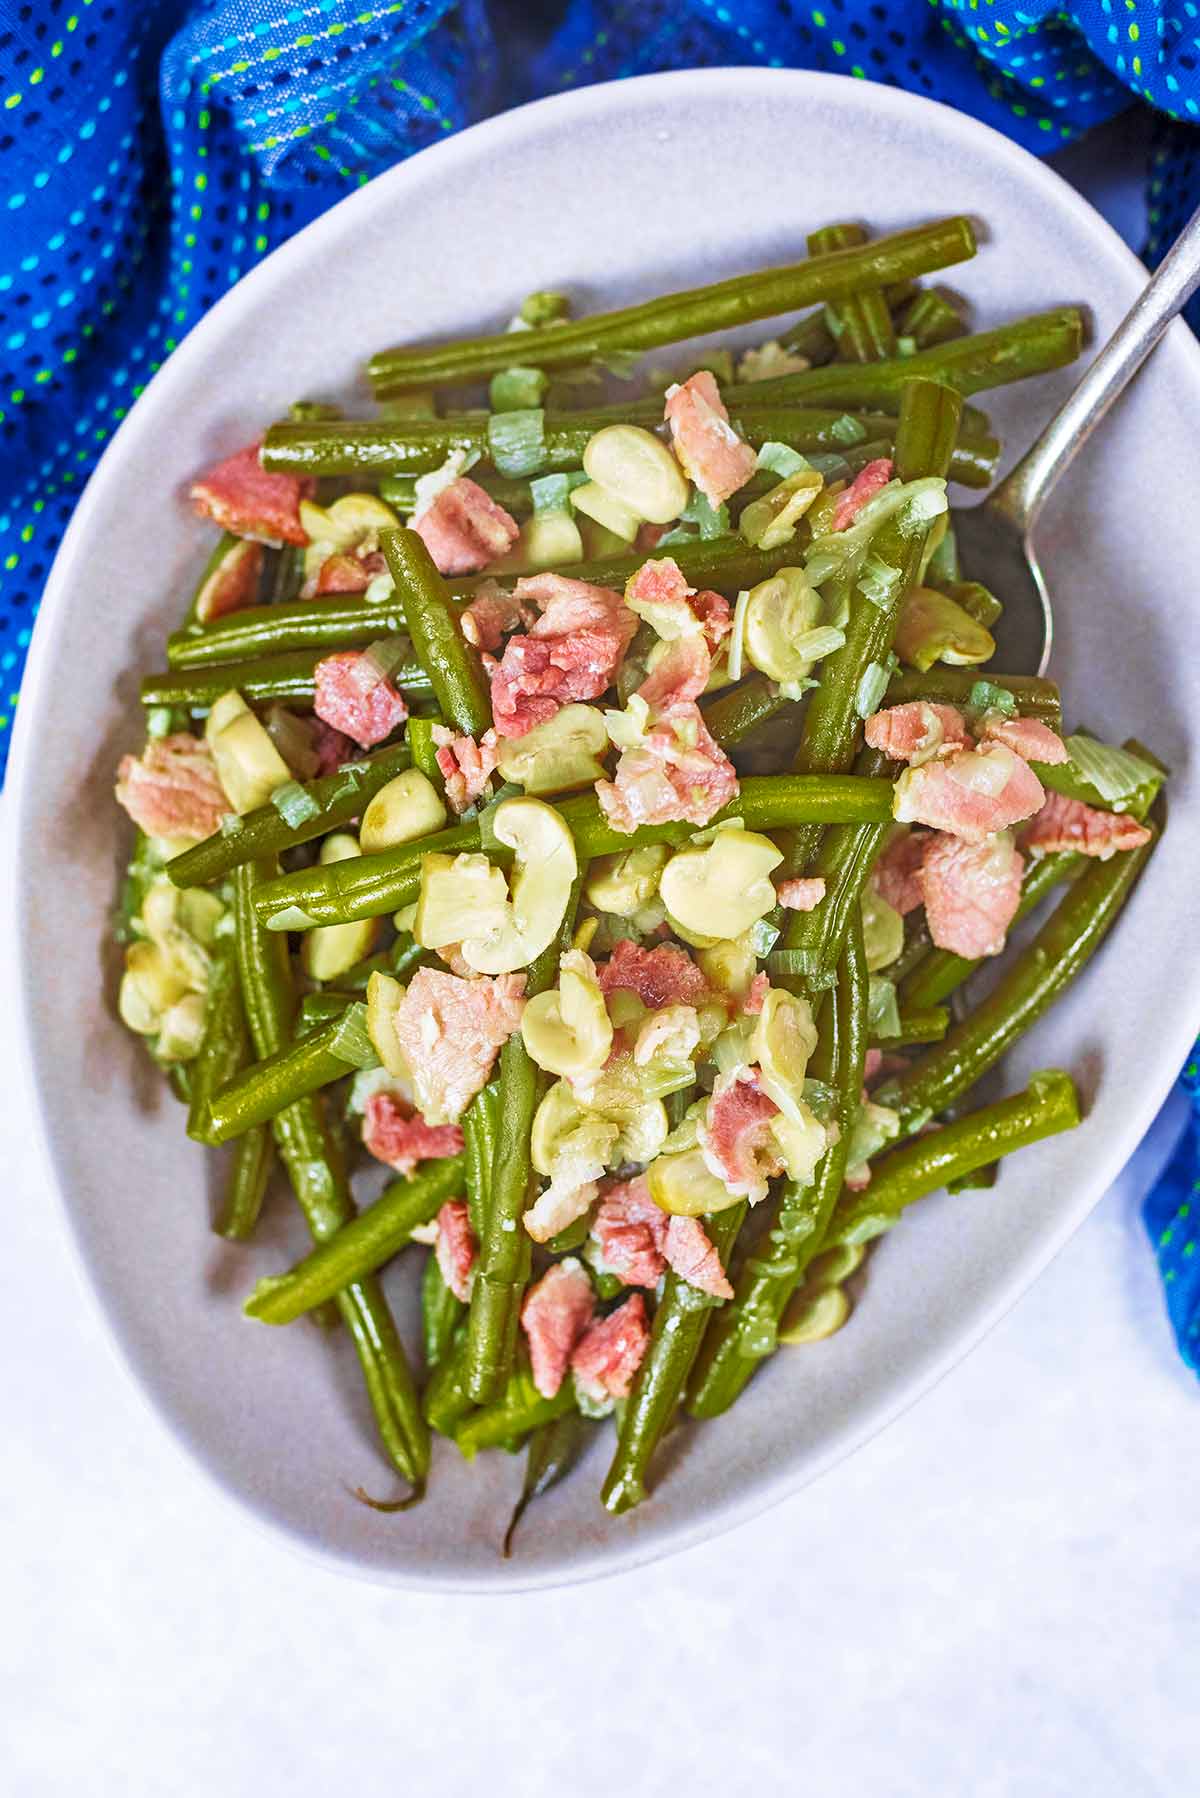 A bowl of green beans mixed with chopped bacon and sliced mushrooms.